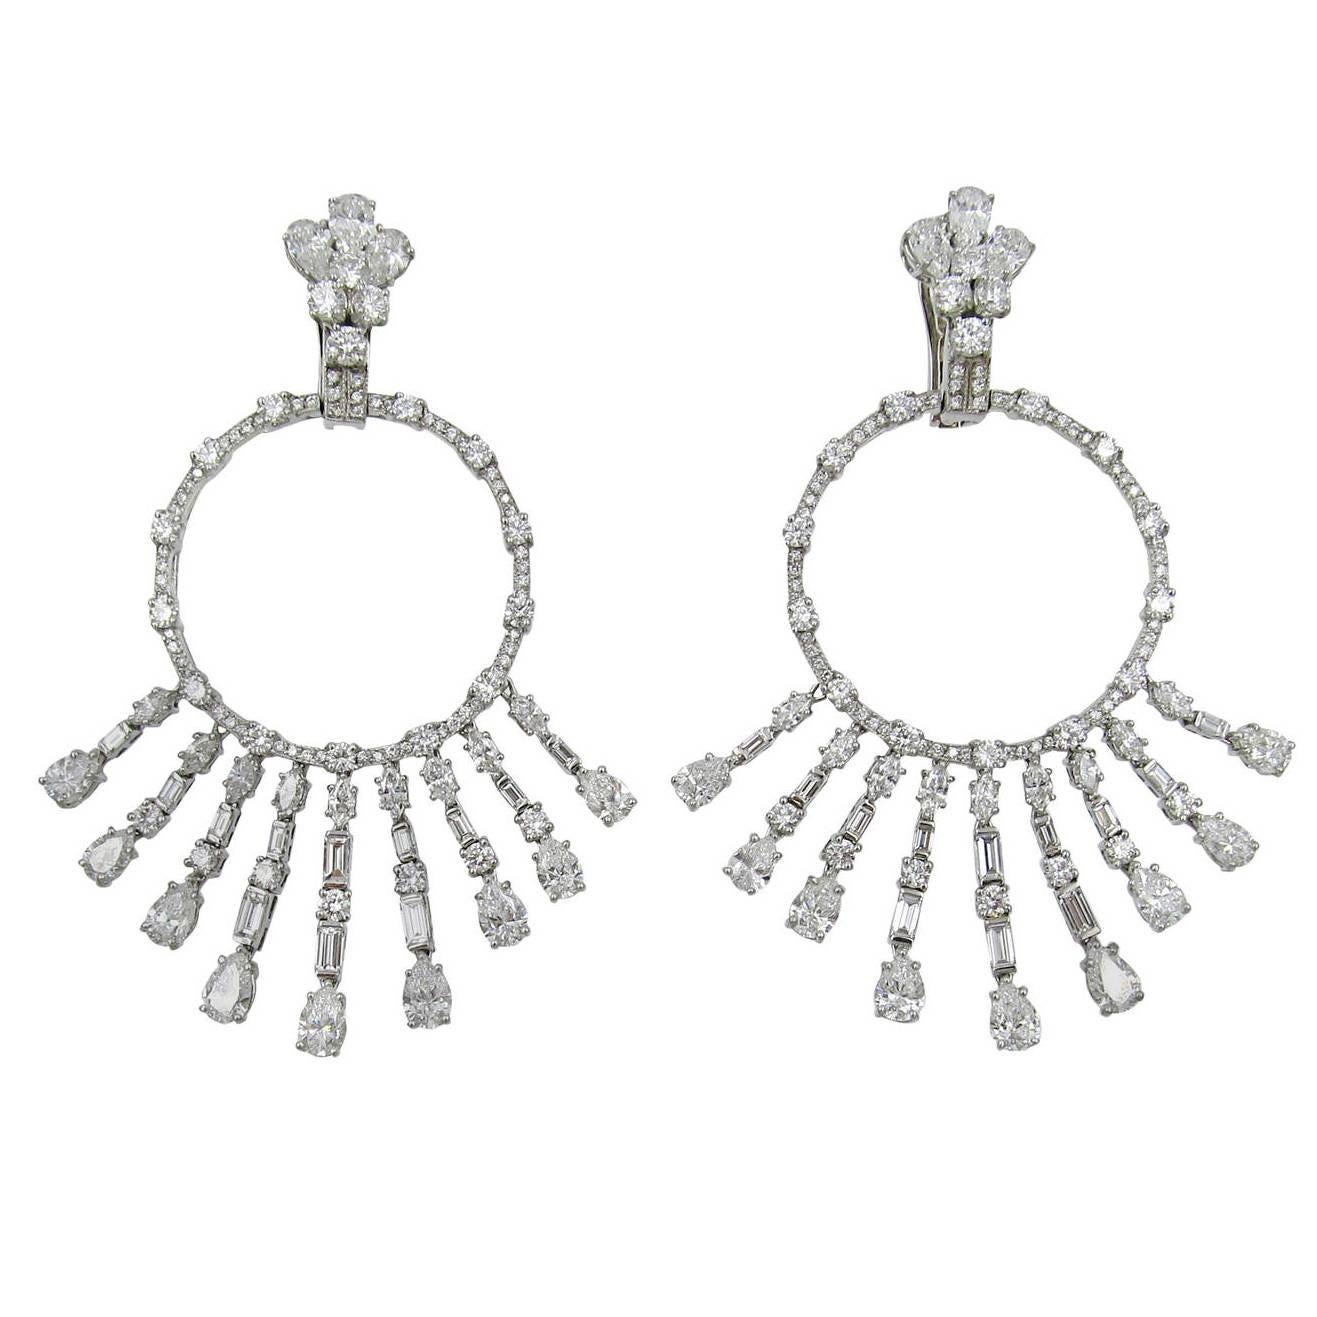 Pair of Platinum and Diamond 'Gypsy' Earrings, Graff
The diamond-set hoops suspending graduated fringes, set with numerous round, baguette, pear and marquise-shaped diamonds weighing 14carats, 
(Retails at GRAFF for $140.000.)
Maker's signature: